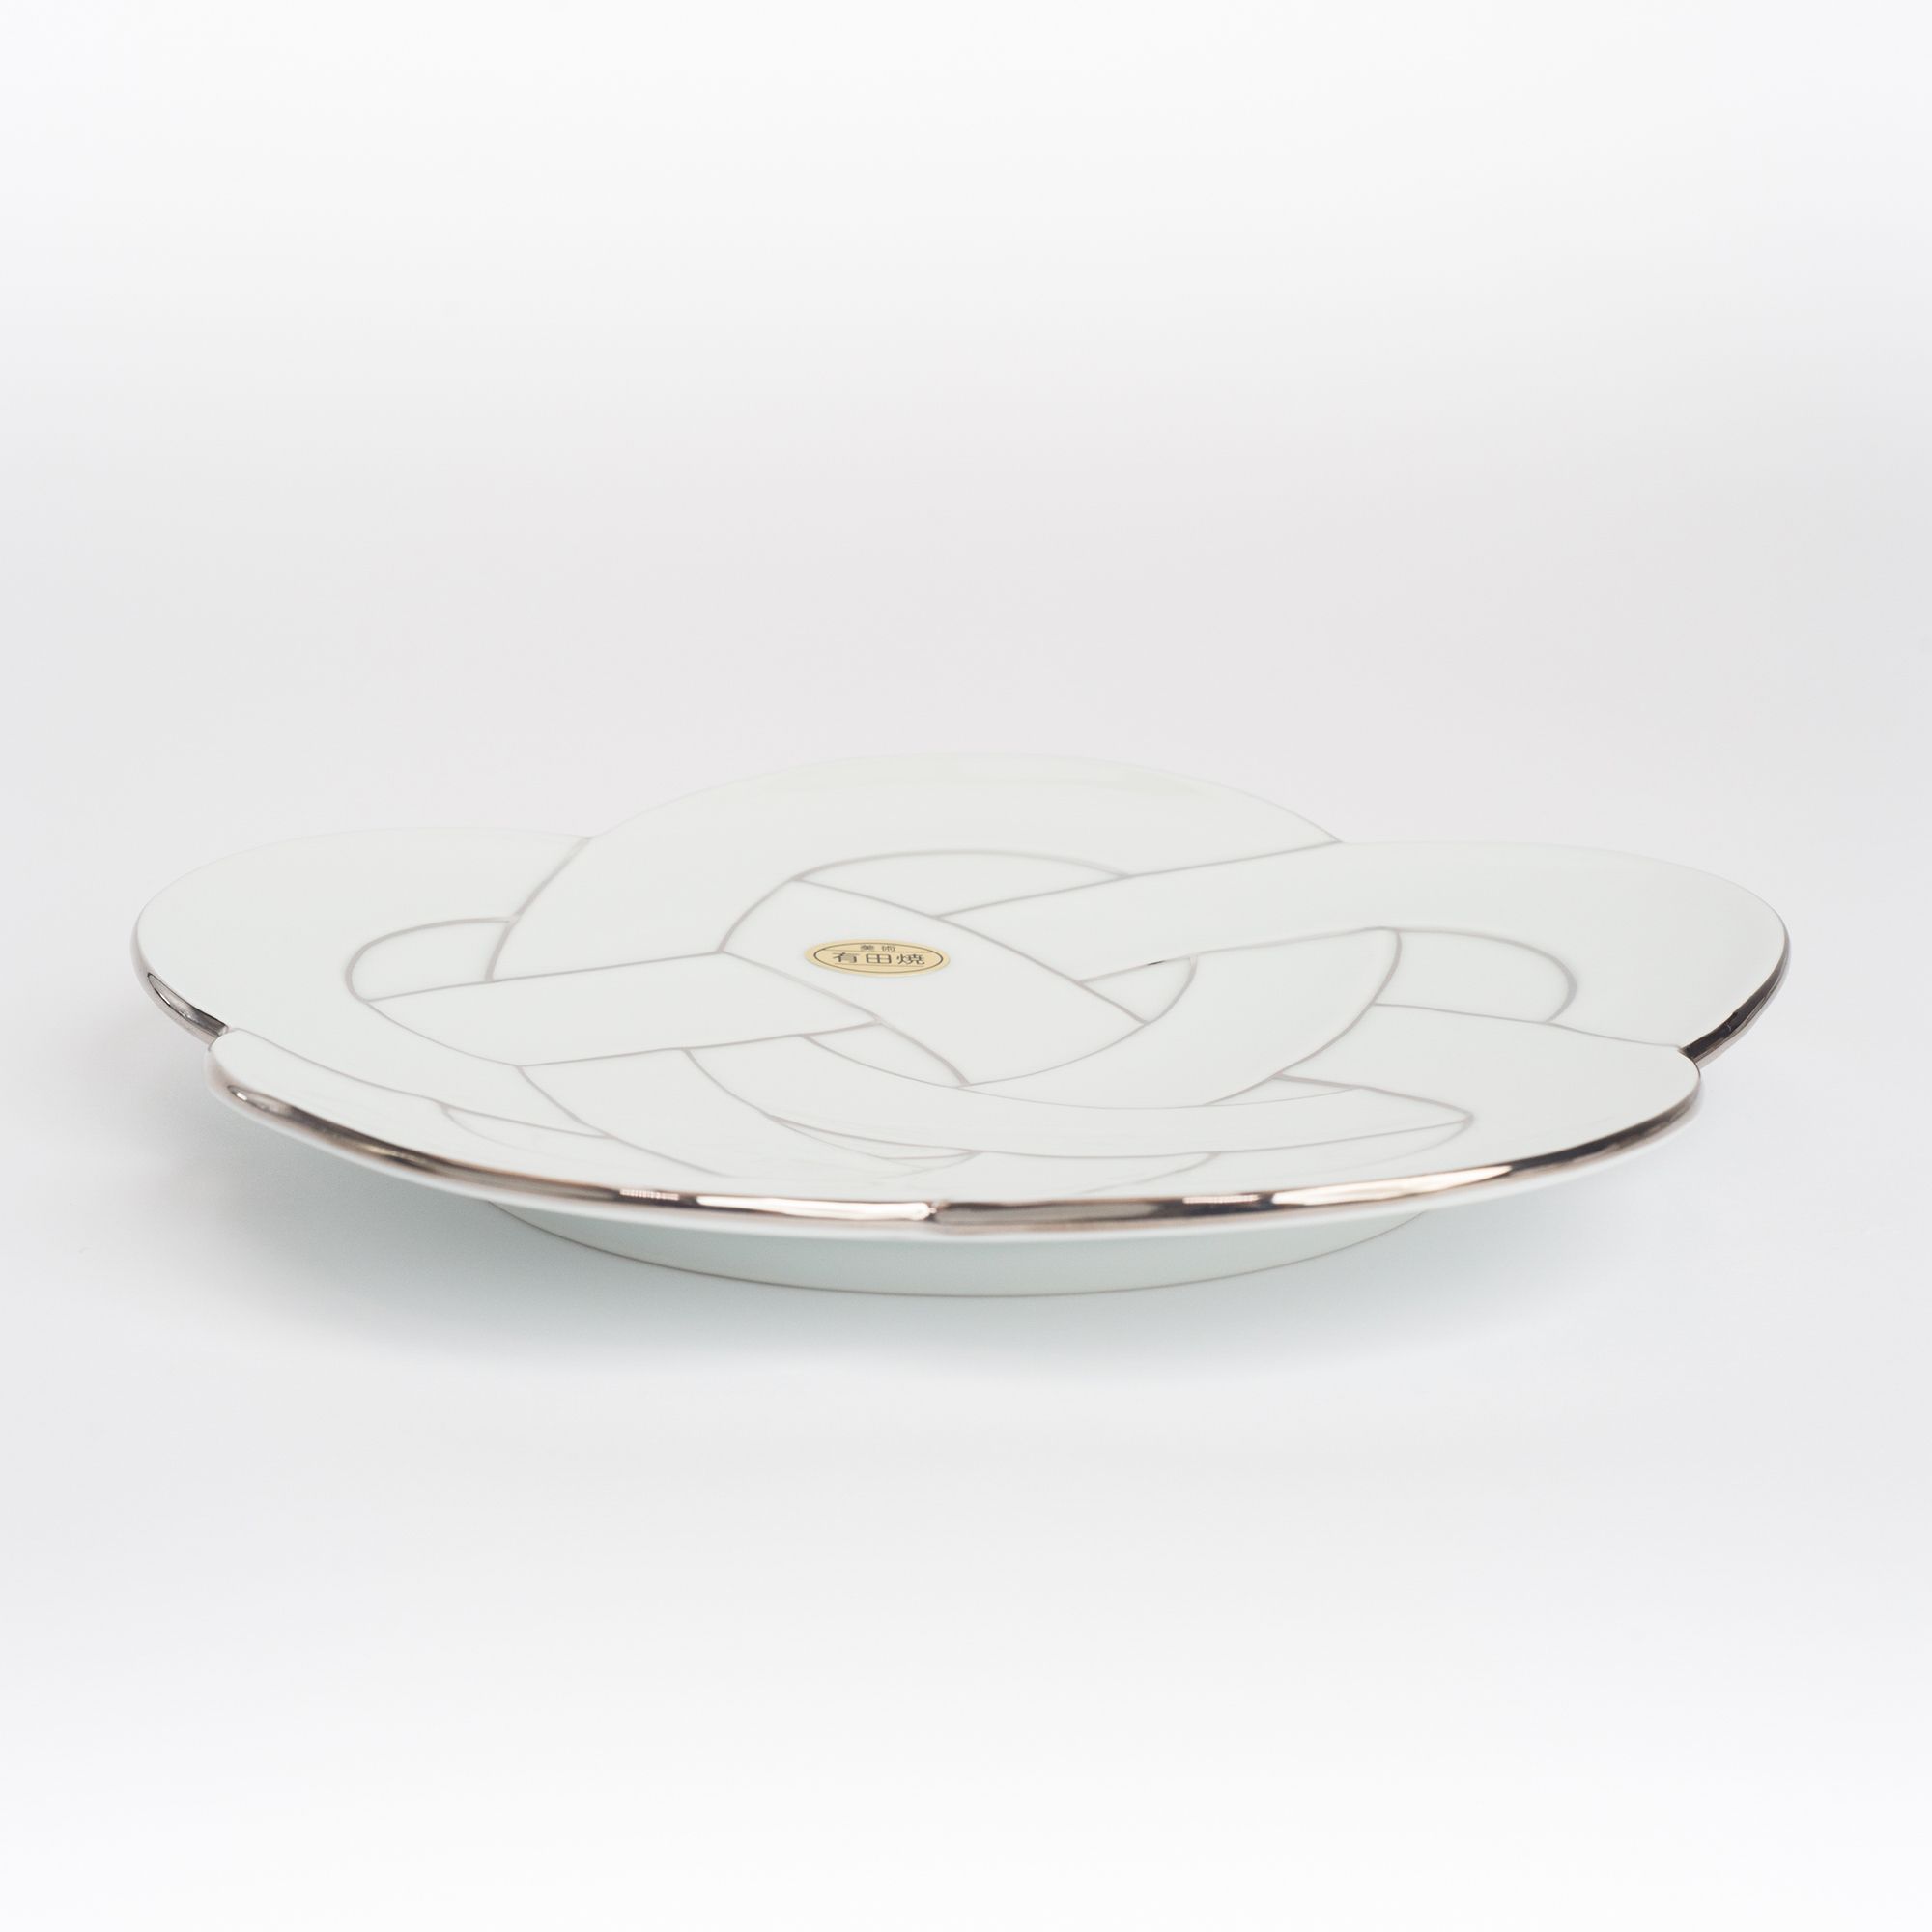 ARITA Ware Star Knot Serving Plate - TASEIGAMA Musubi Collection - Platinum Wire